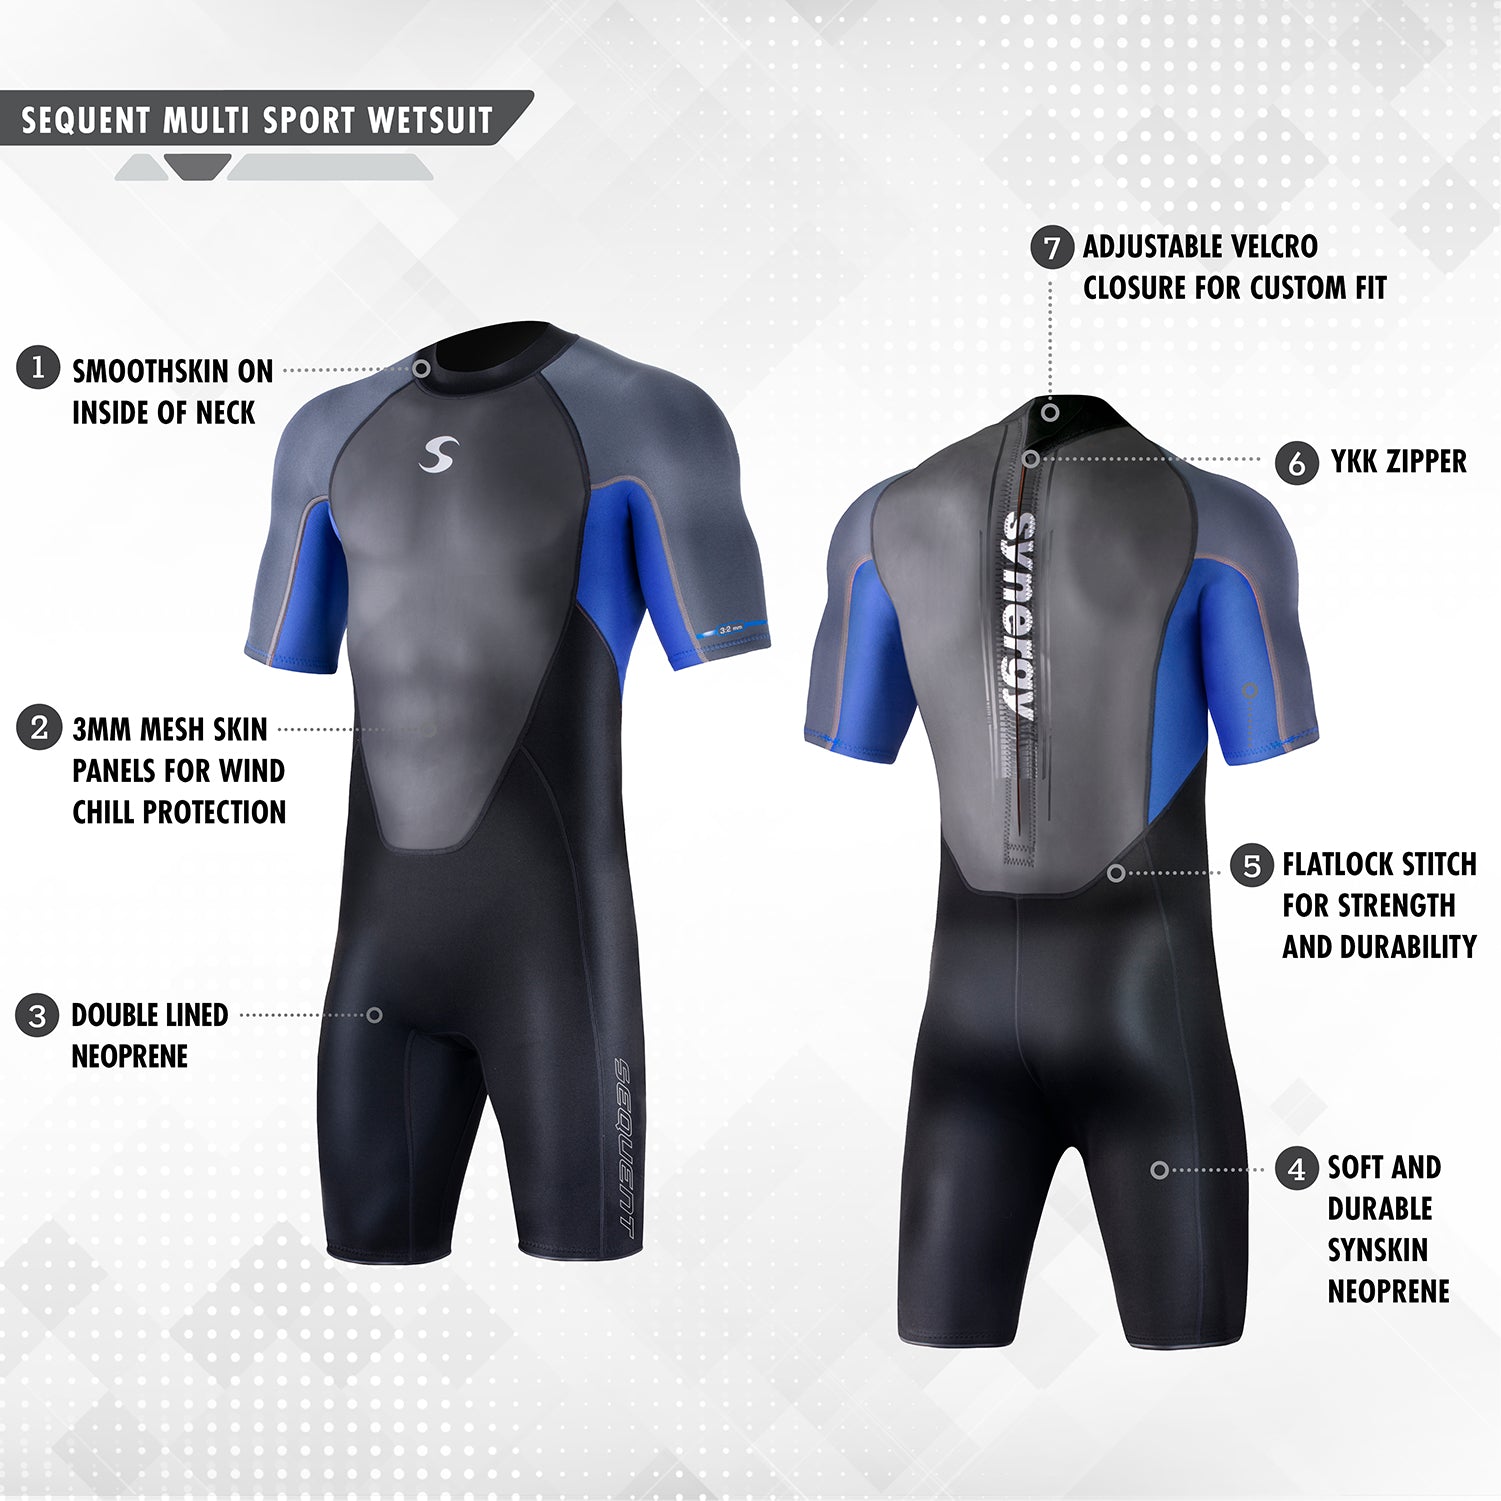 Men's Sequent Multi Sport Wetsuit - Synergy Wetsuits